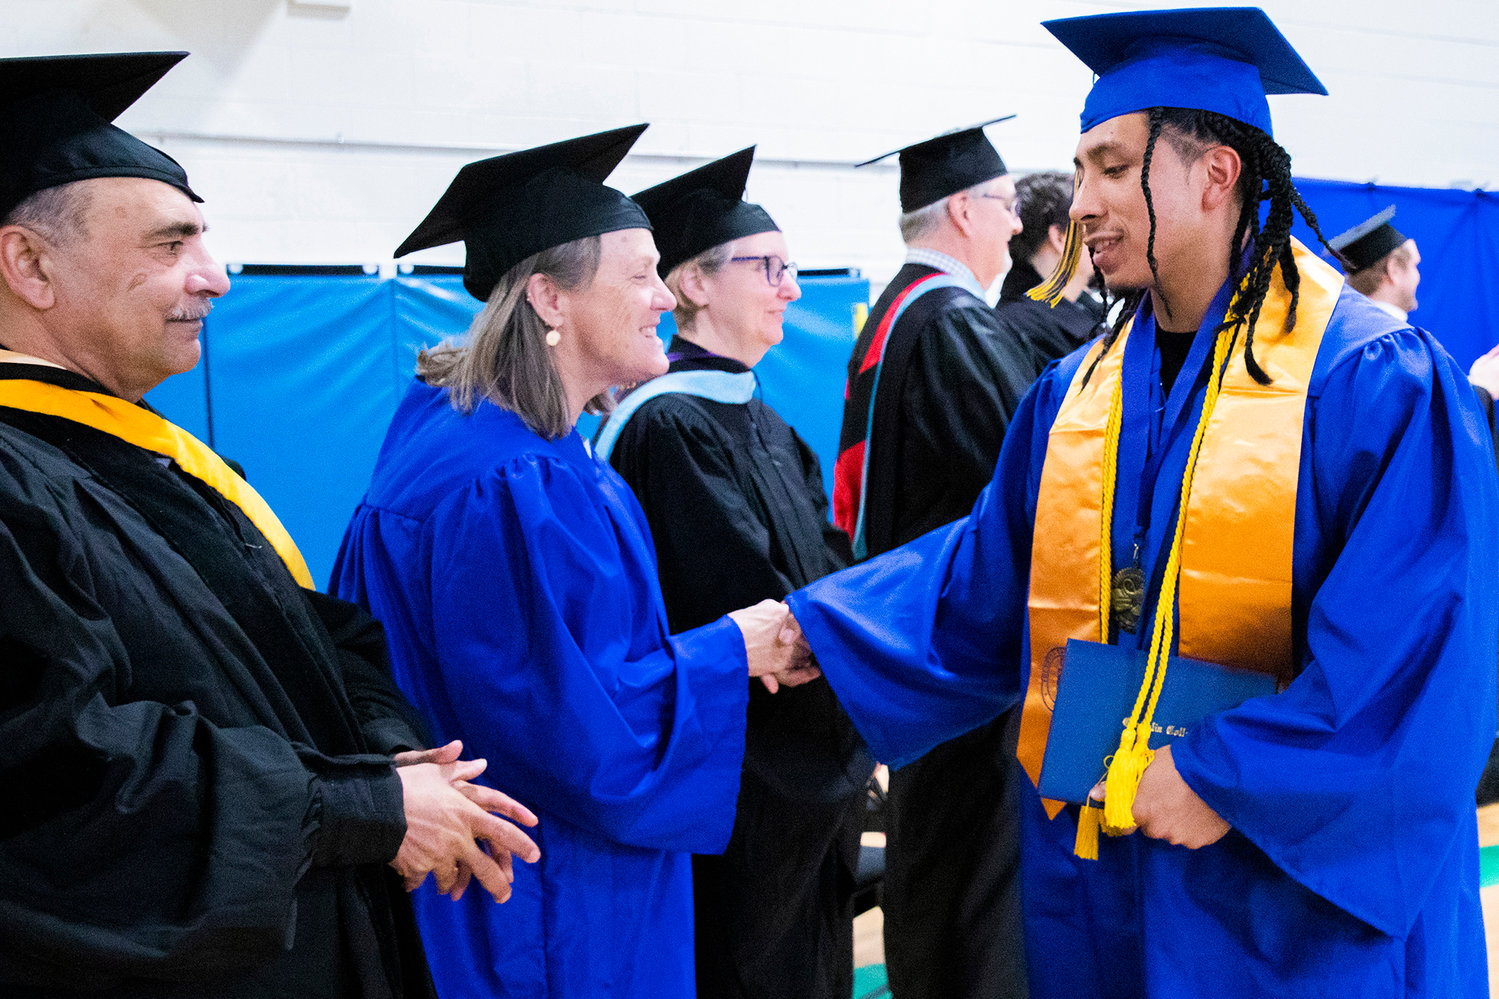 Edgar Calixto smiles and shakes hands after receiving his diploma during a graduation ceremony for Centralia College graduates held at the Green Hill School on Wednesday in Chehalis.